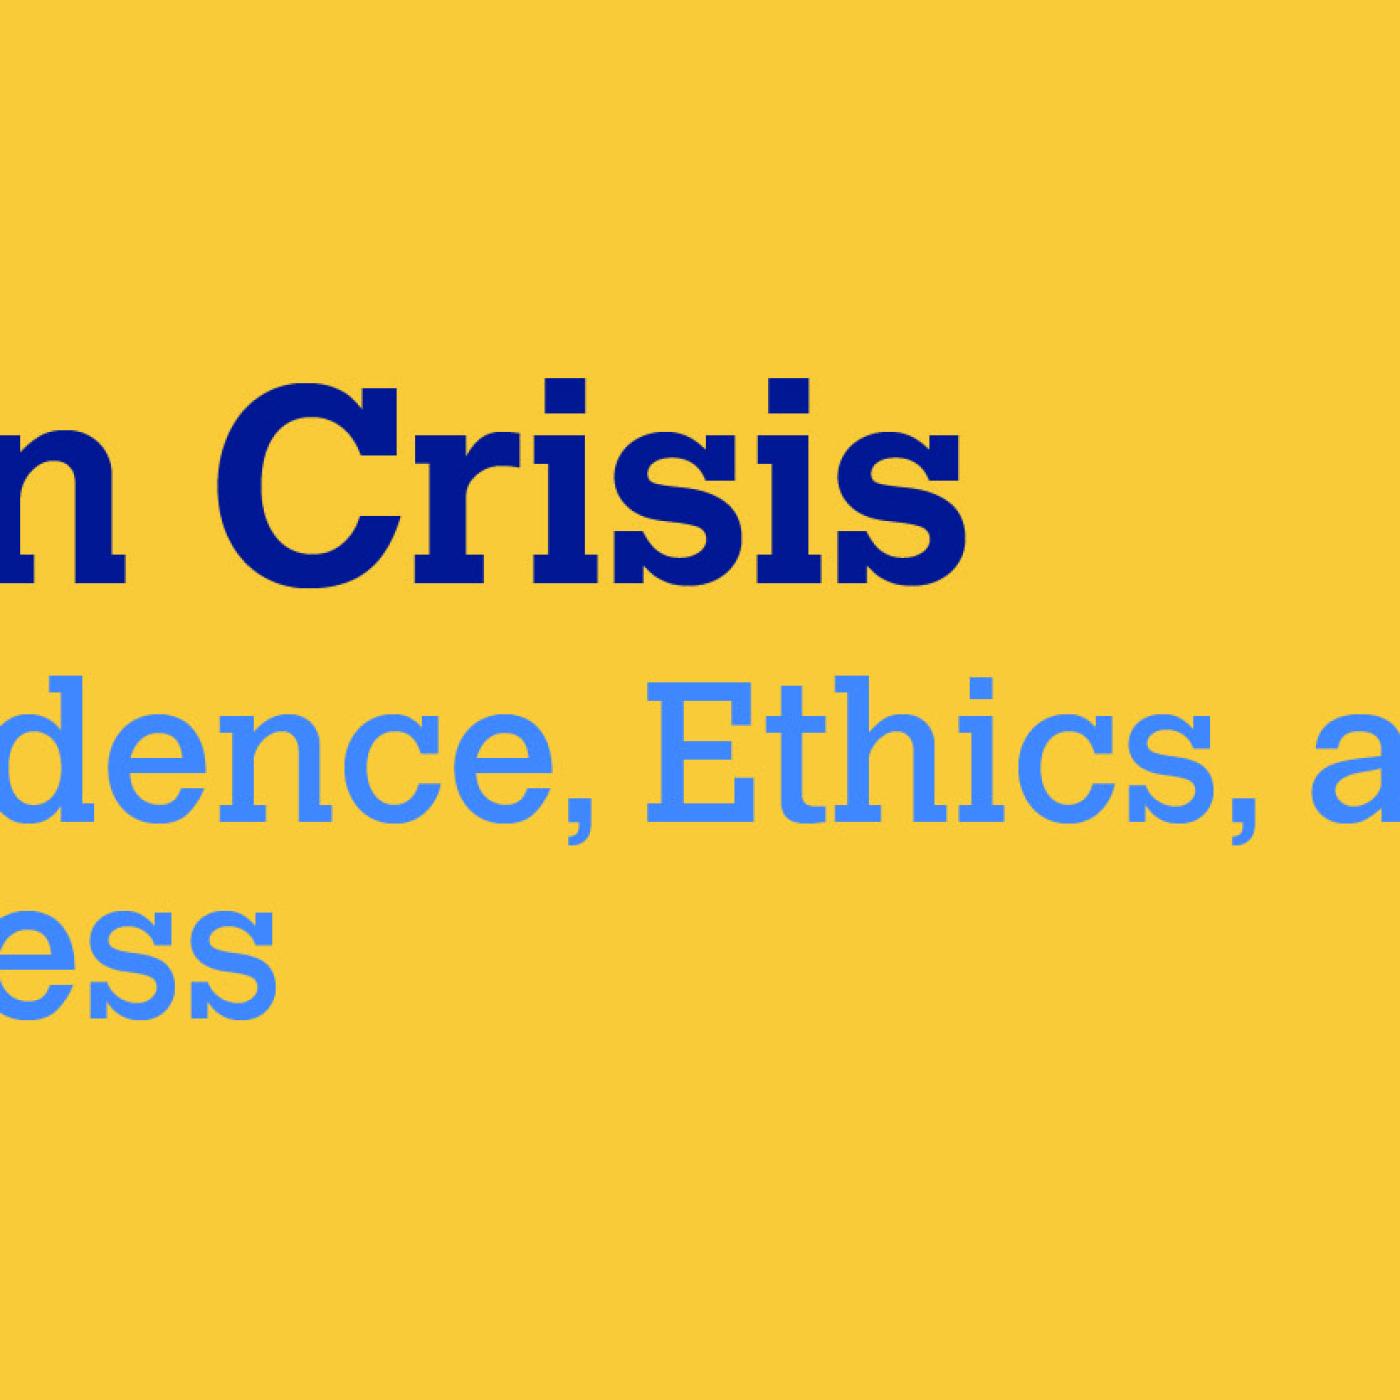 Leadership in Crisis: Ensuring Independence, Ethics, and Resilience in the Electoral Process